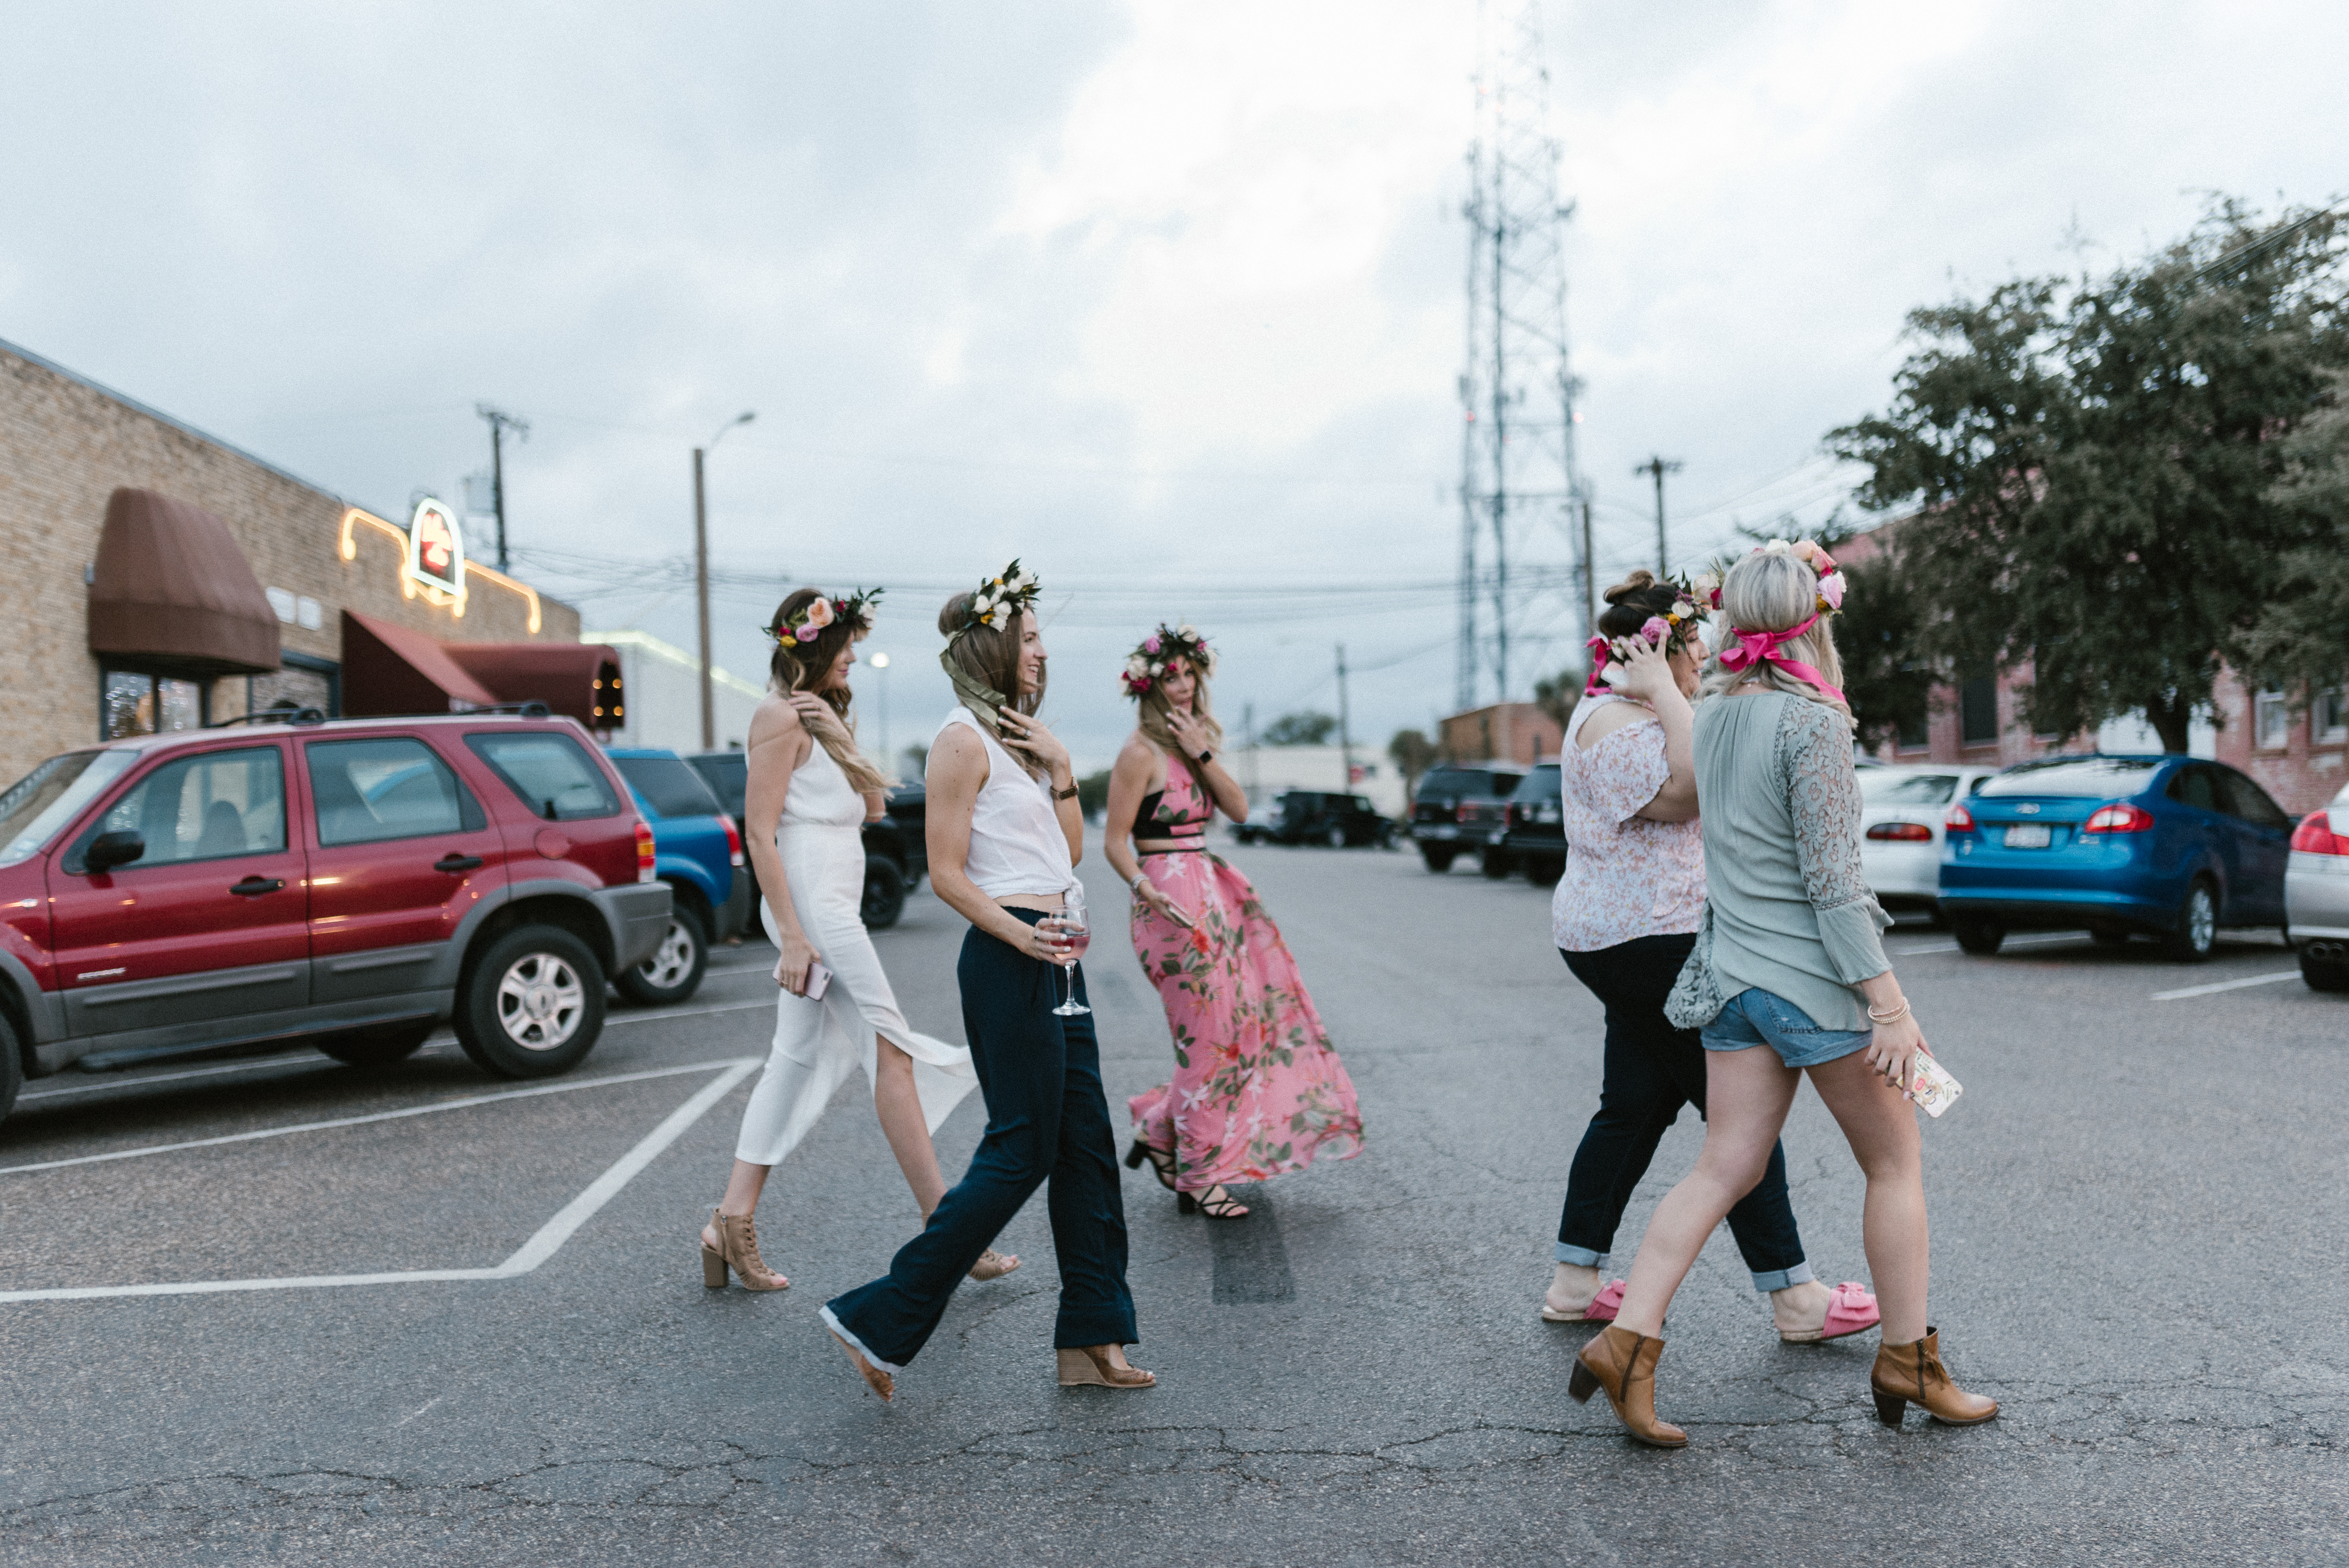 Flower Crown Party in West Texas | Bachelorette Idea | Lubbock, TX bloggers | by lifestyle and fashion blogger Audrey Madison stowe - Bachelorette Flower Crowns featured by popular Texas blogger, Audrey Madison Stowe